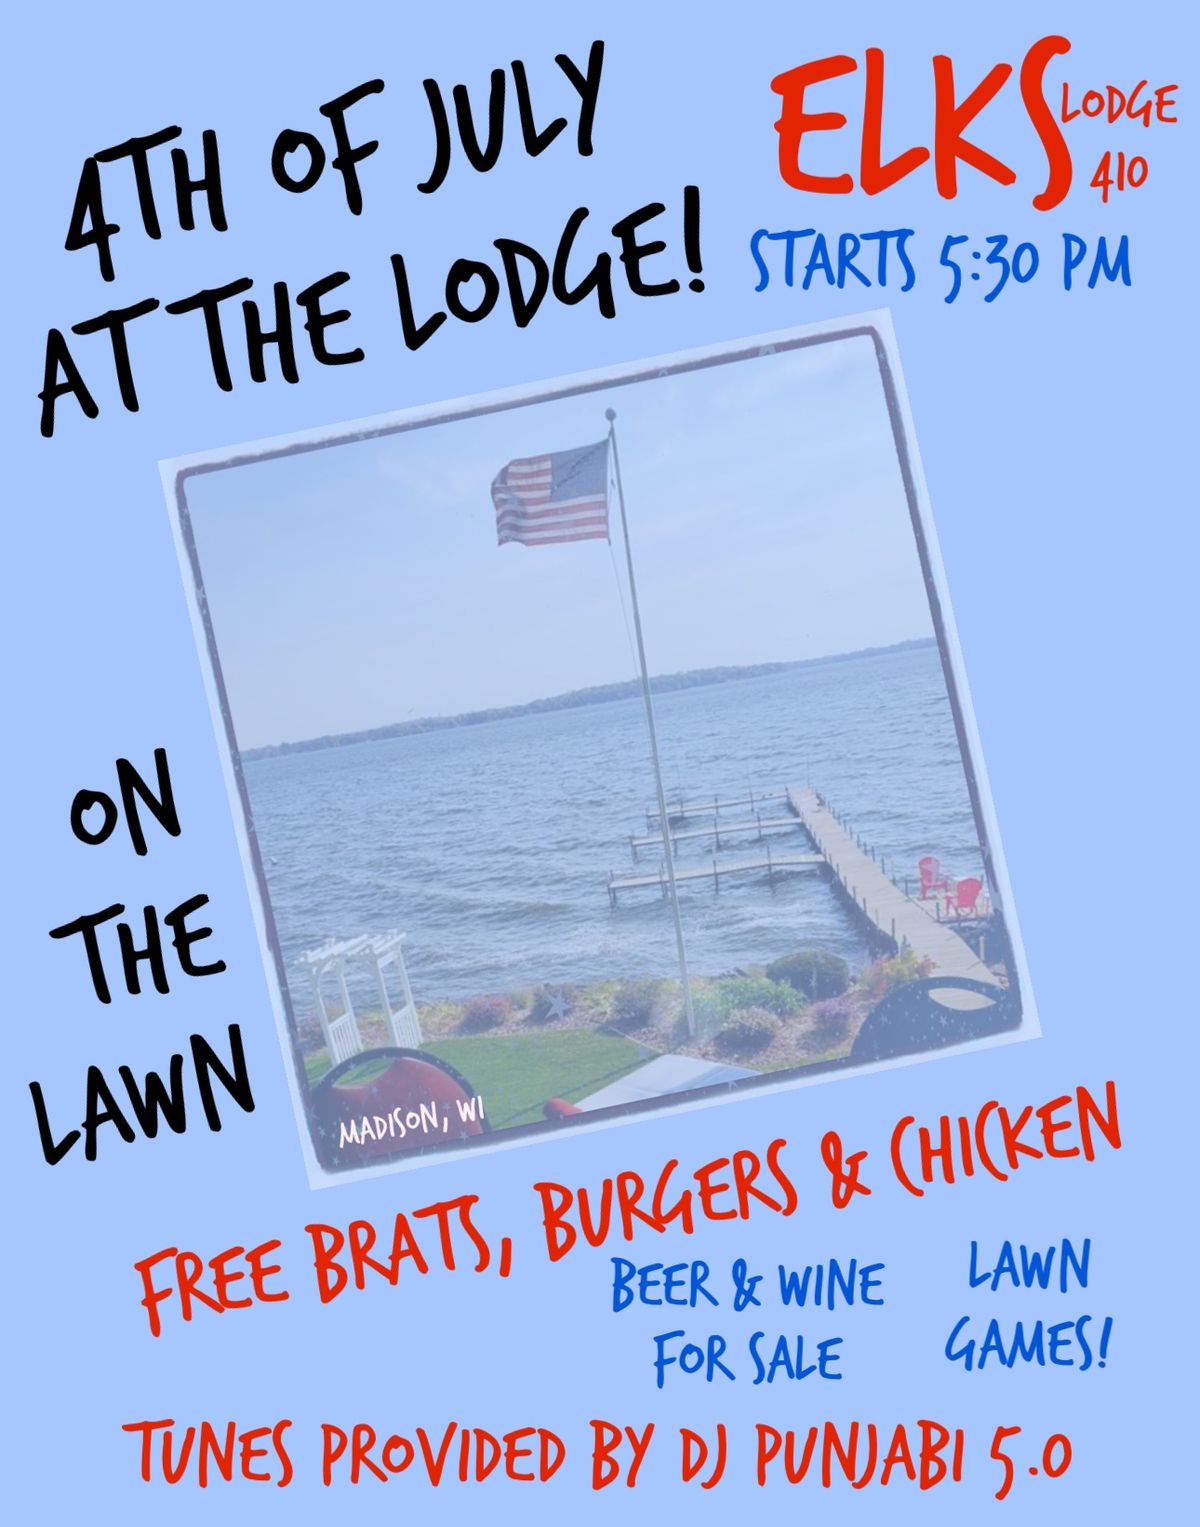 4th of July at the Lodge